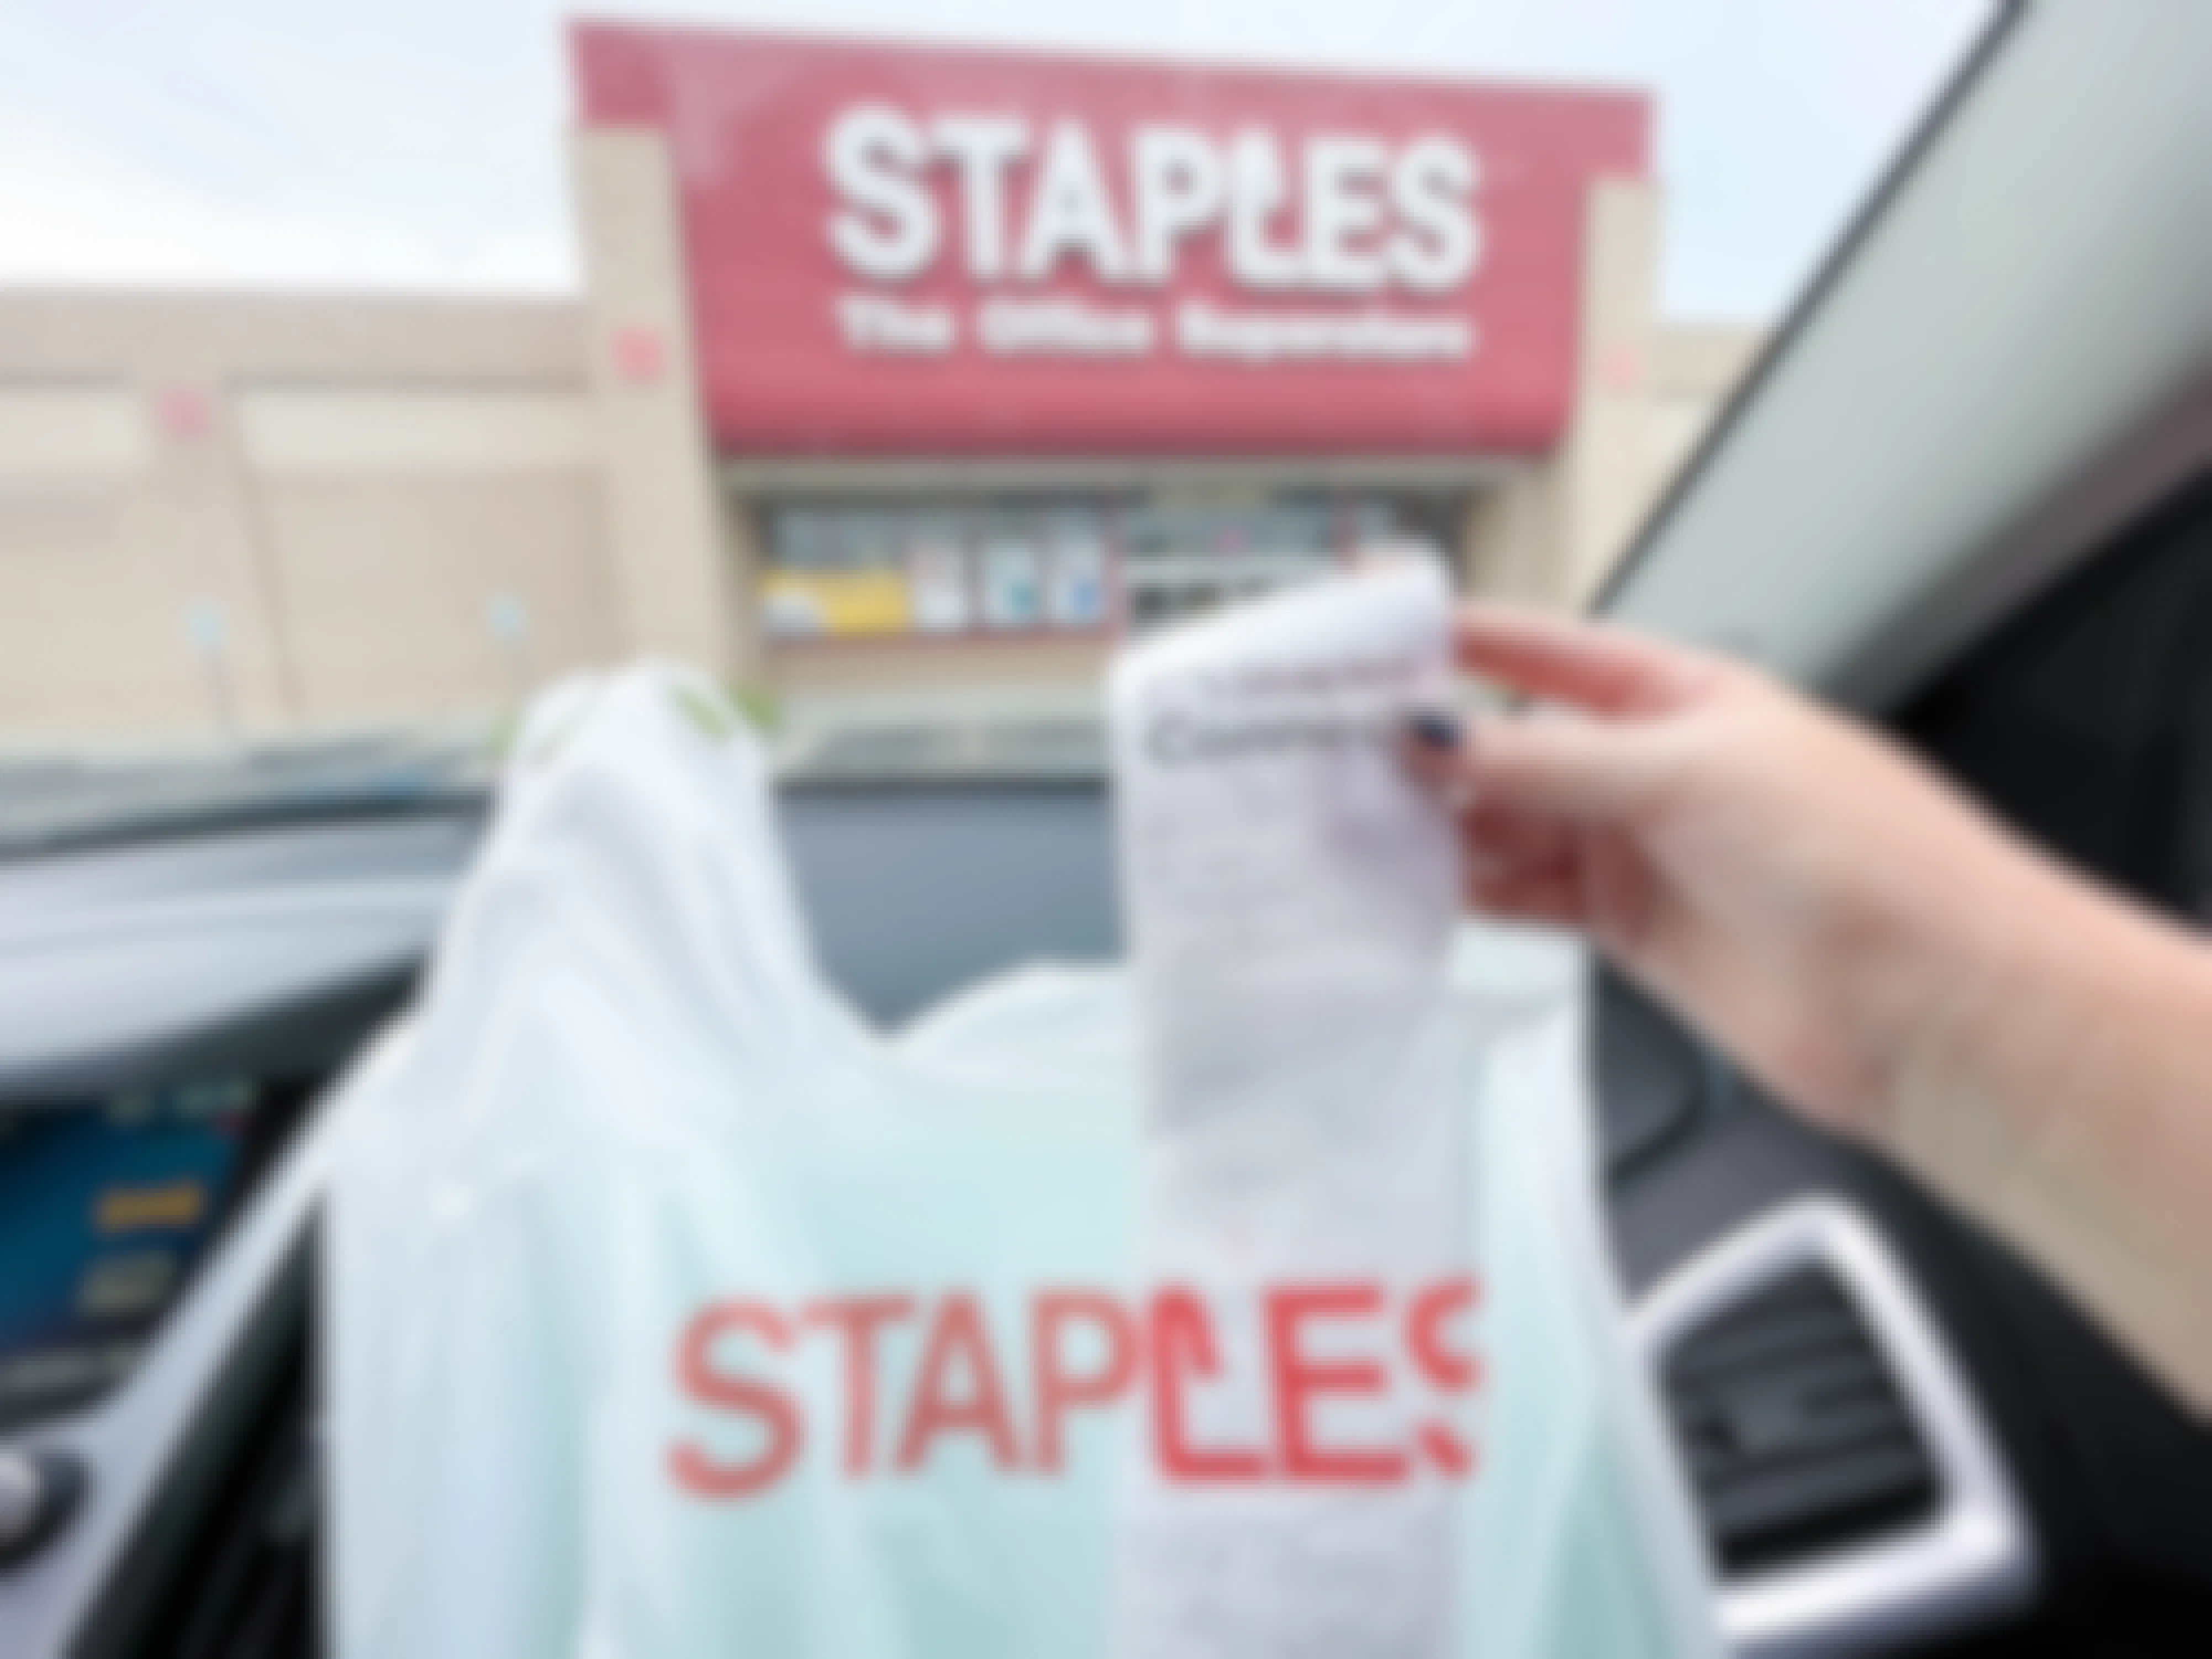 staples receipt being pulled out of staples bag in car parked at staples